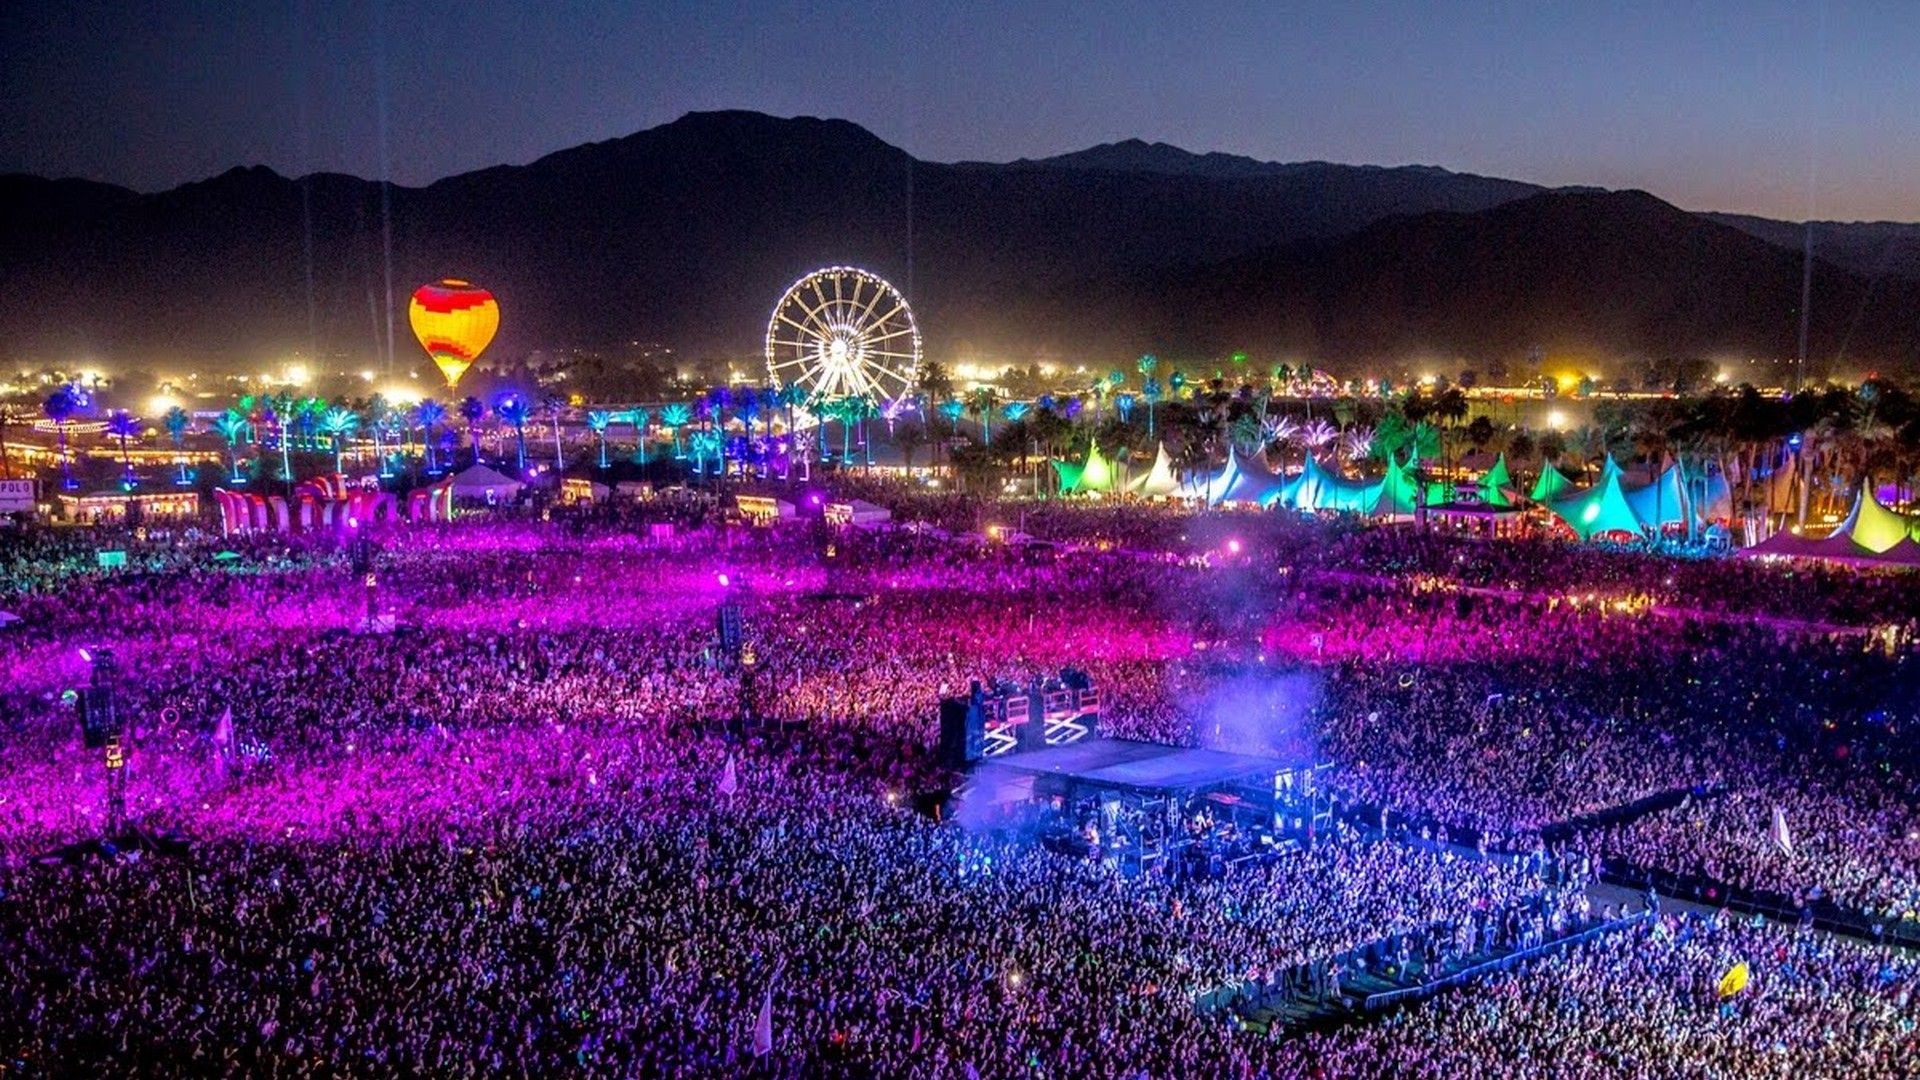 Coachella: A music festival that started in the late 90s, USA. 1920x1080 Full HD Wallpaper.